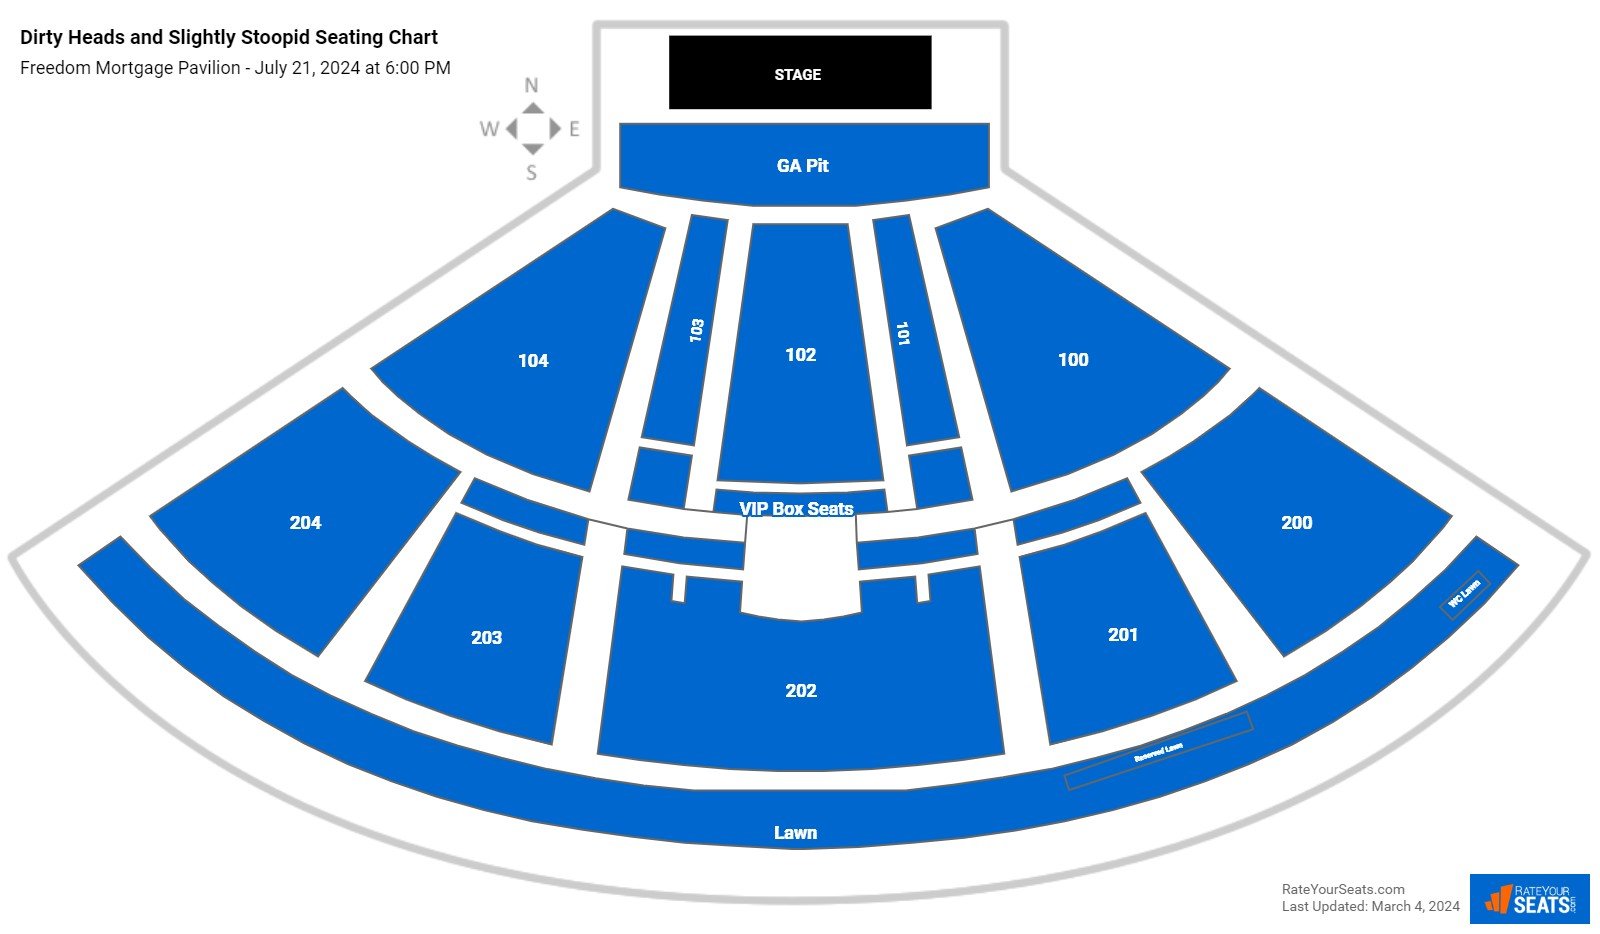 Dirty Heads and Slightly Stoopid seating chart Freedom Mortgage Pavilion